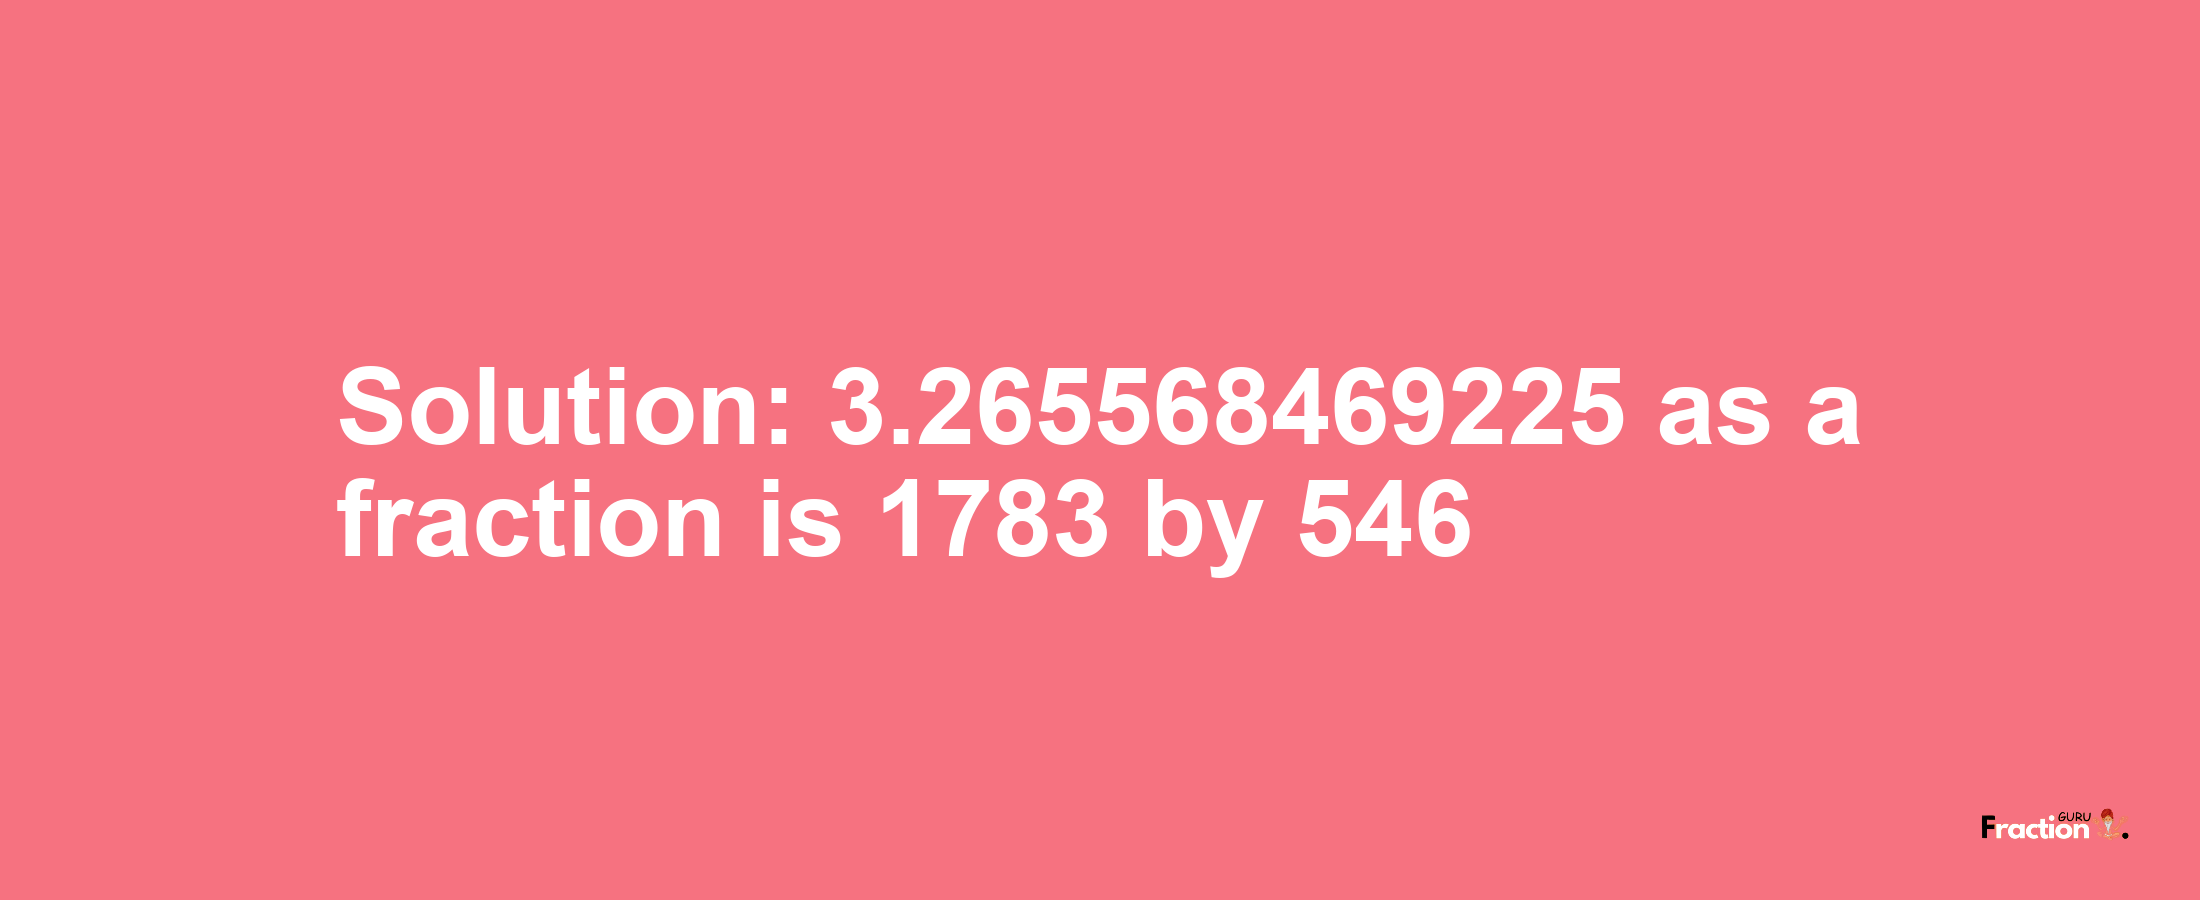 Solution:3.265568469225 as a fraction is 1783/546